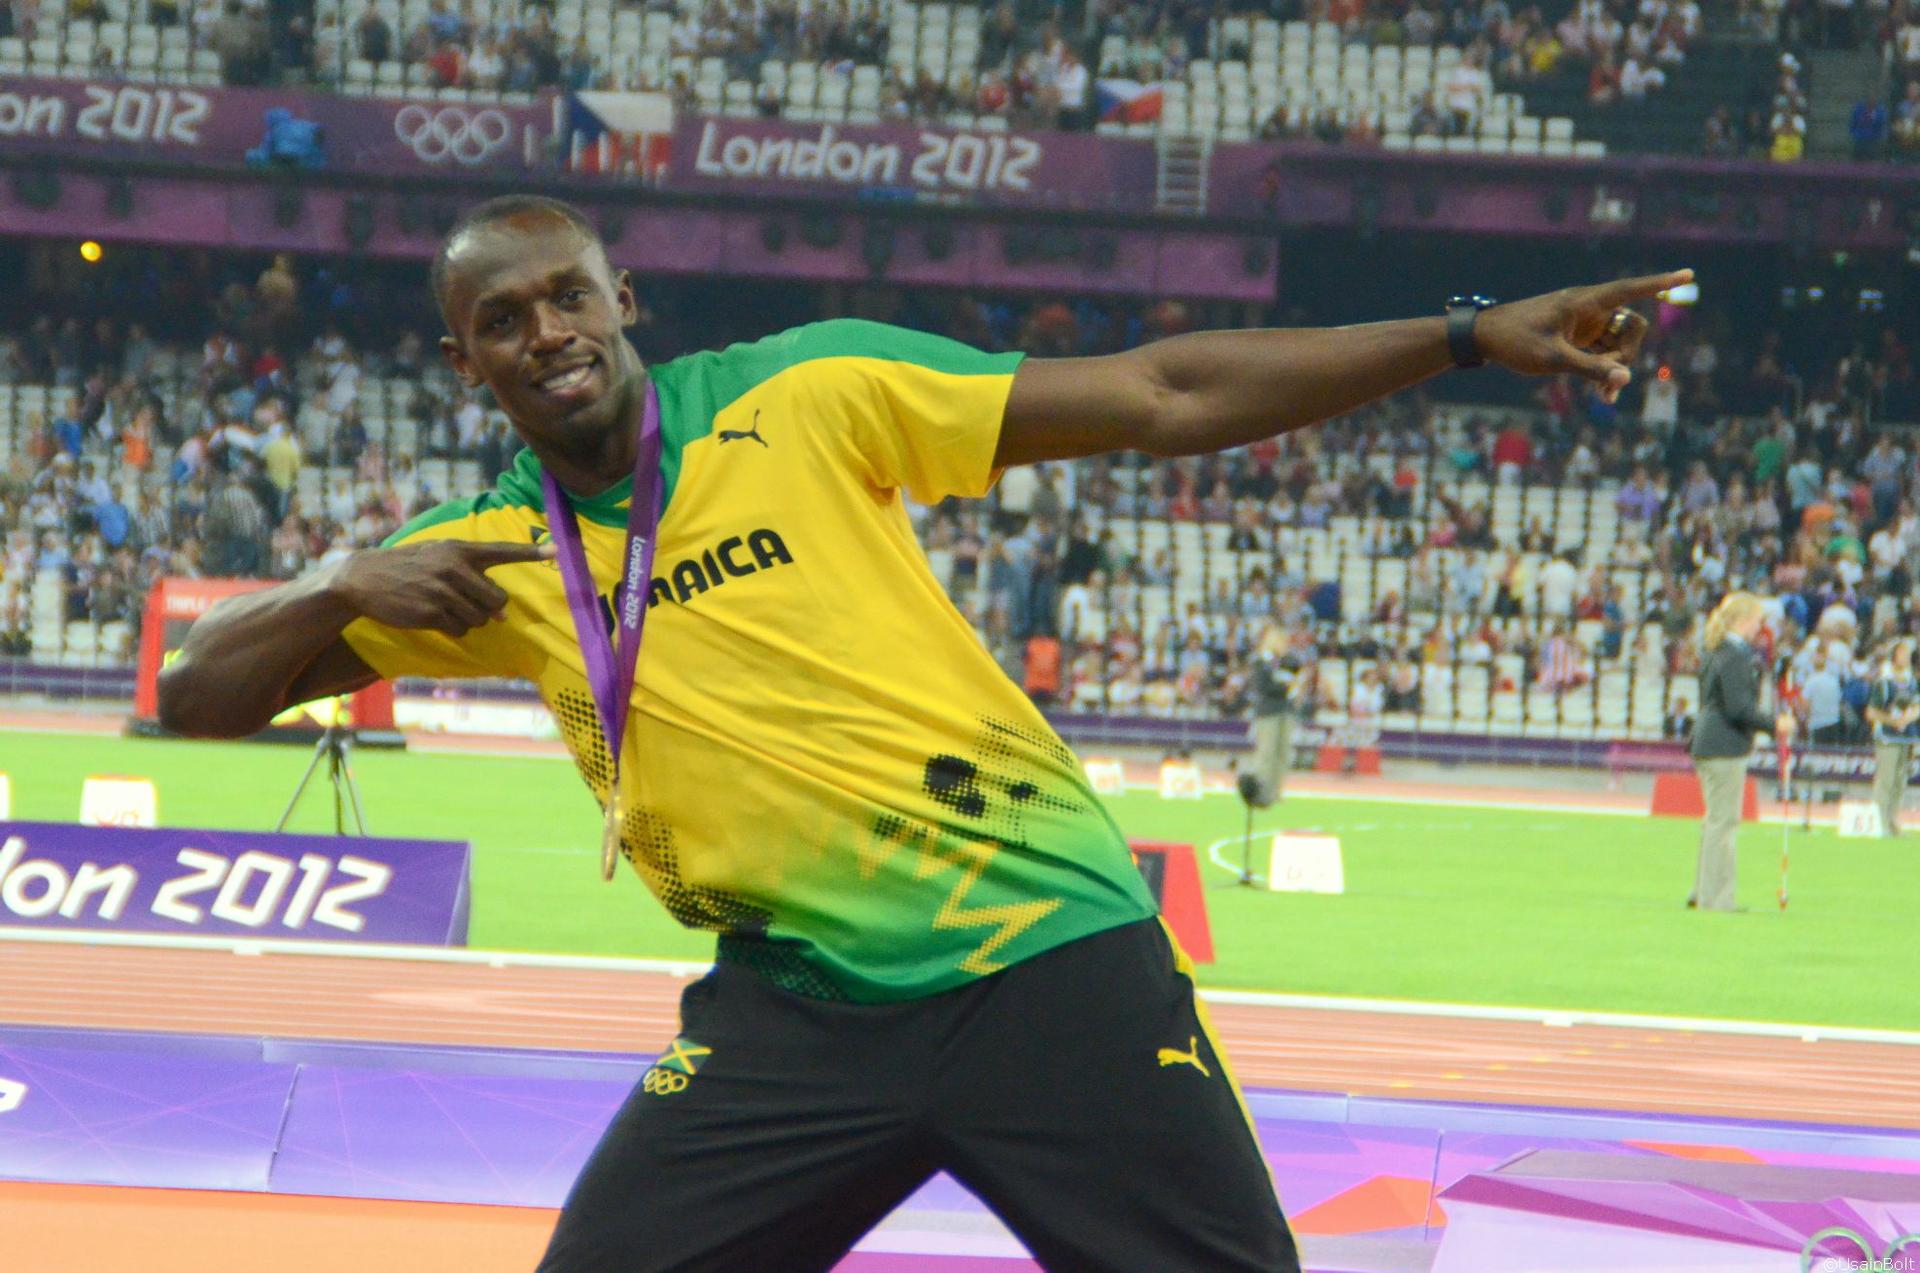 Usain Bolt at the Olympic Games 200 meter final